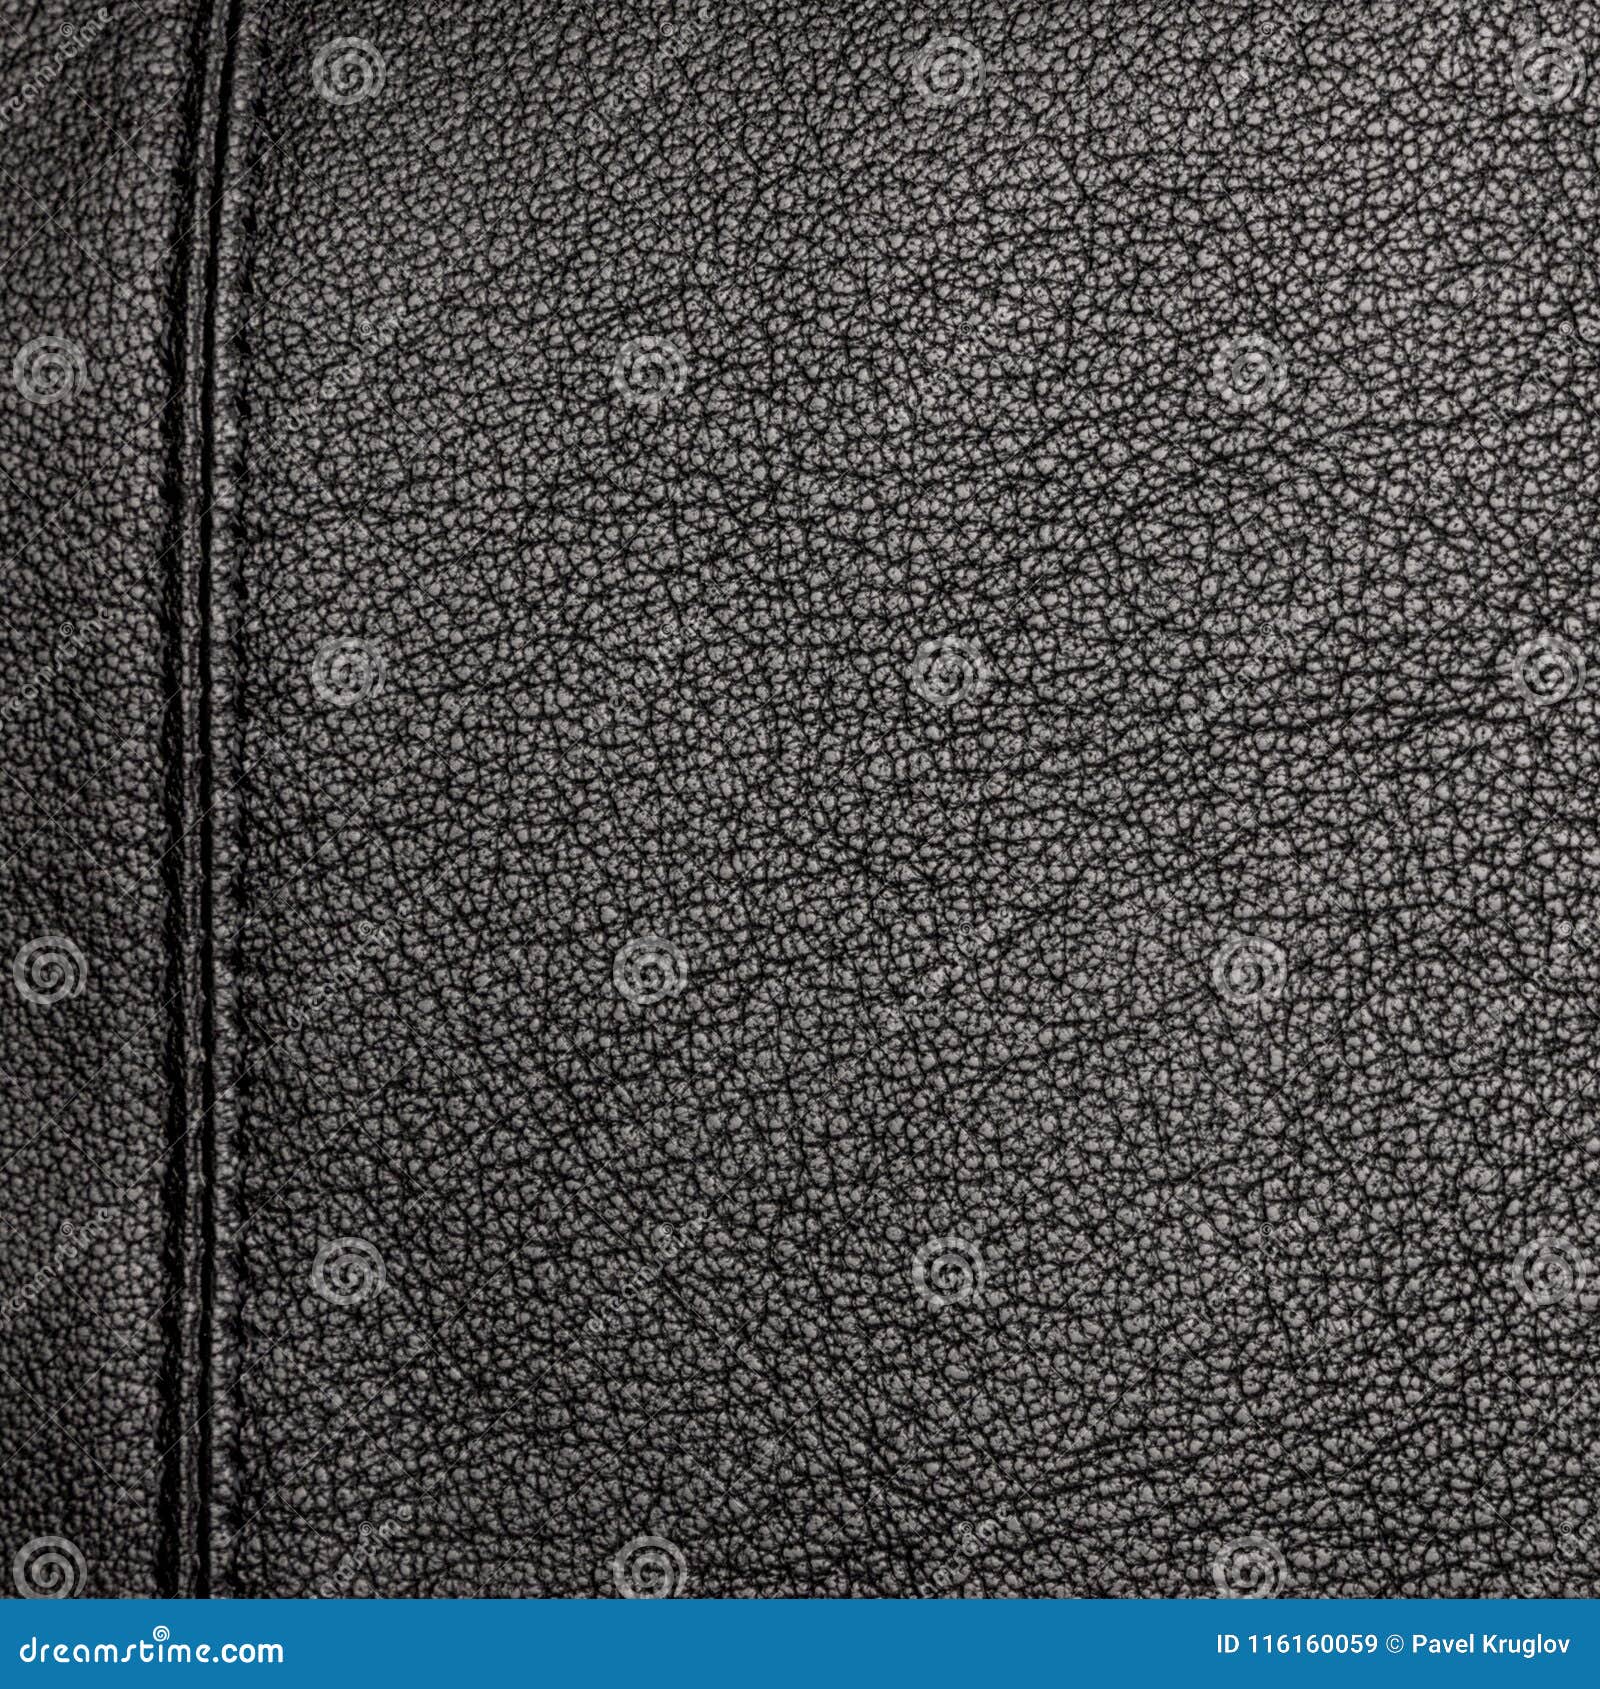 The Texture of the Two Stitched Halves of Soft Black Leather Stock ...